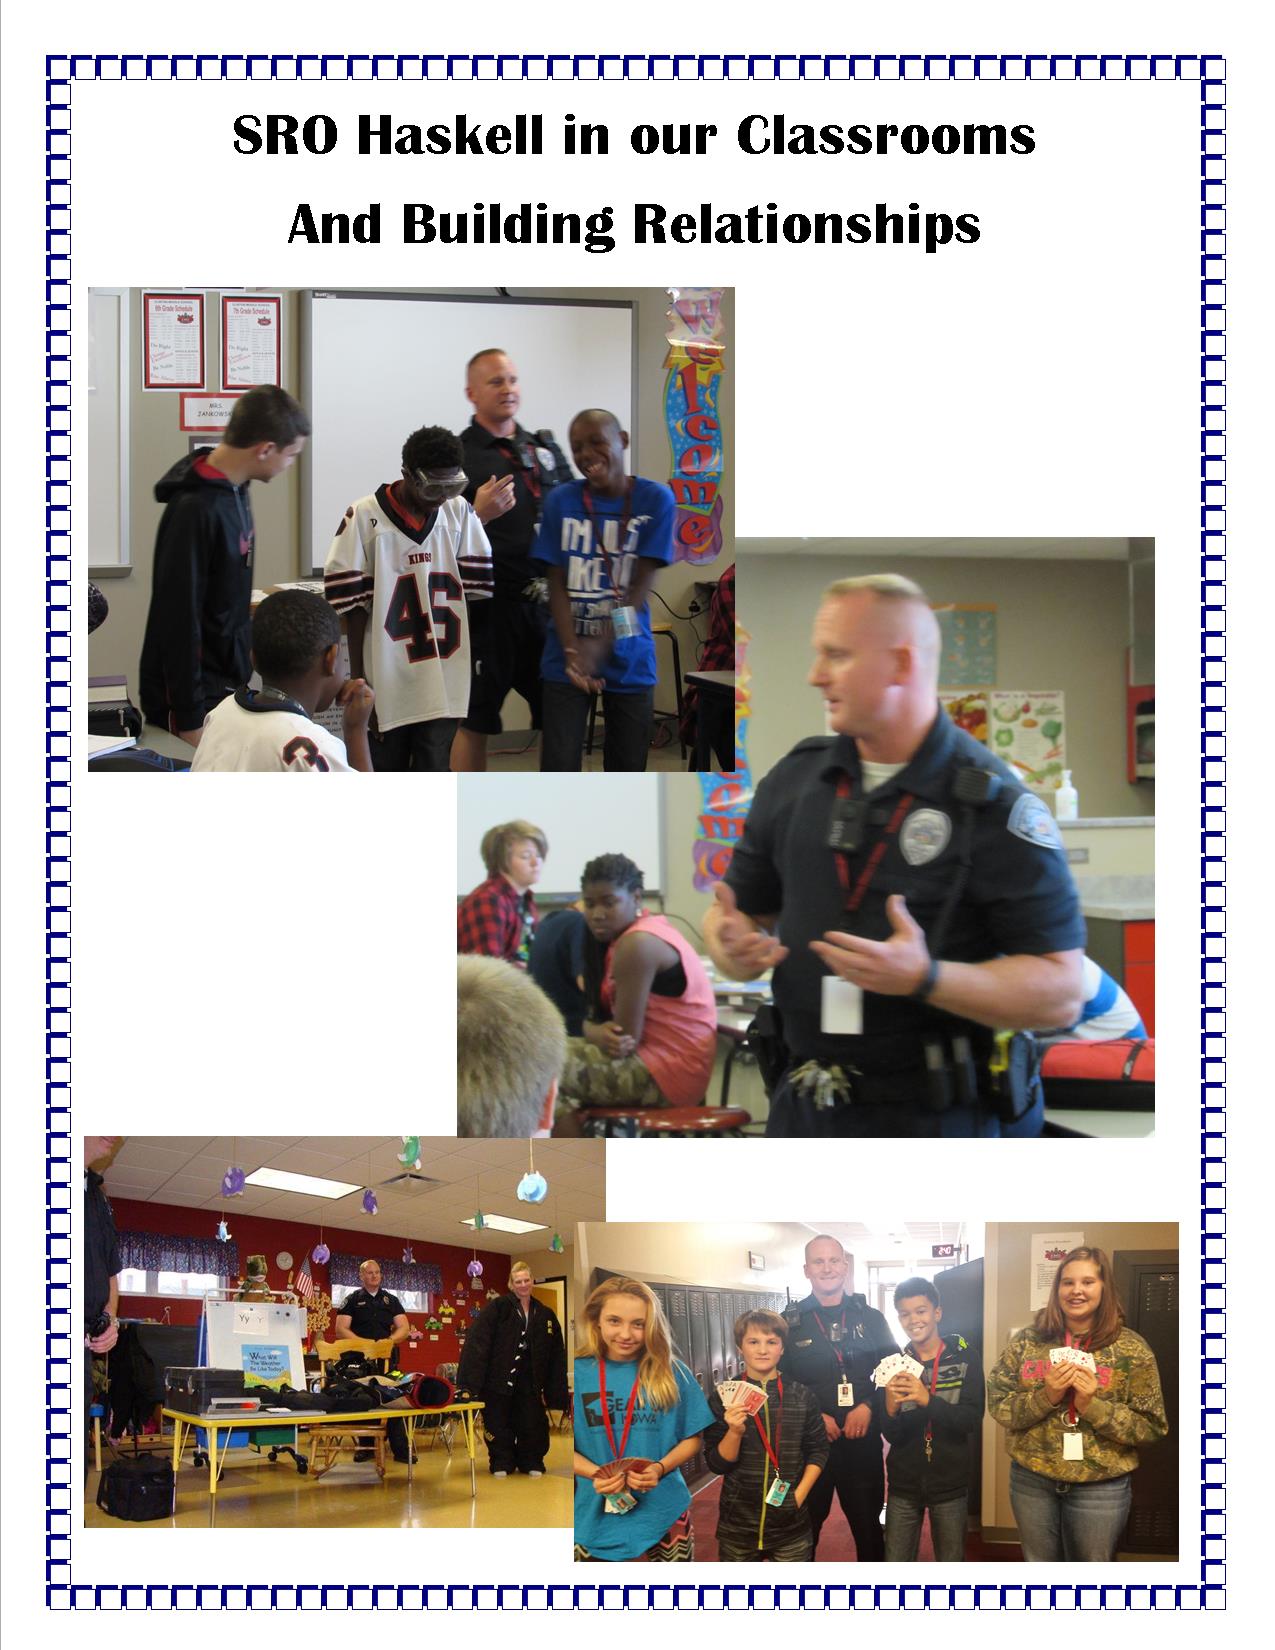 Flyer of Officer Haskell stating "SRO Haskell in our Classrooms And Building Relationships"